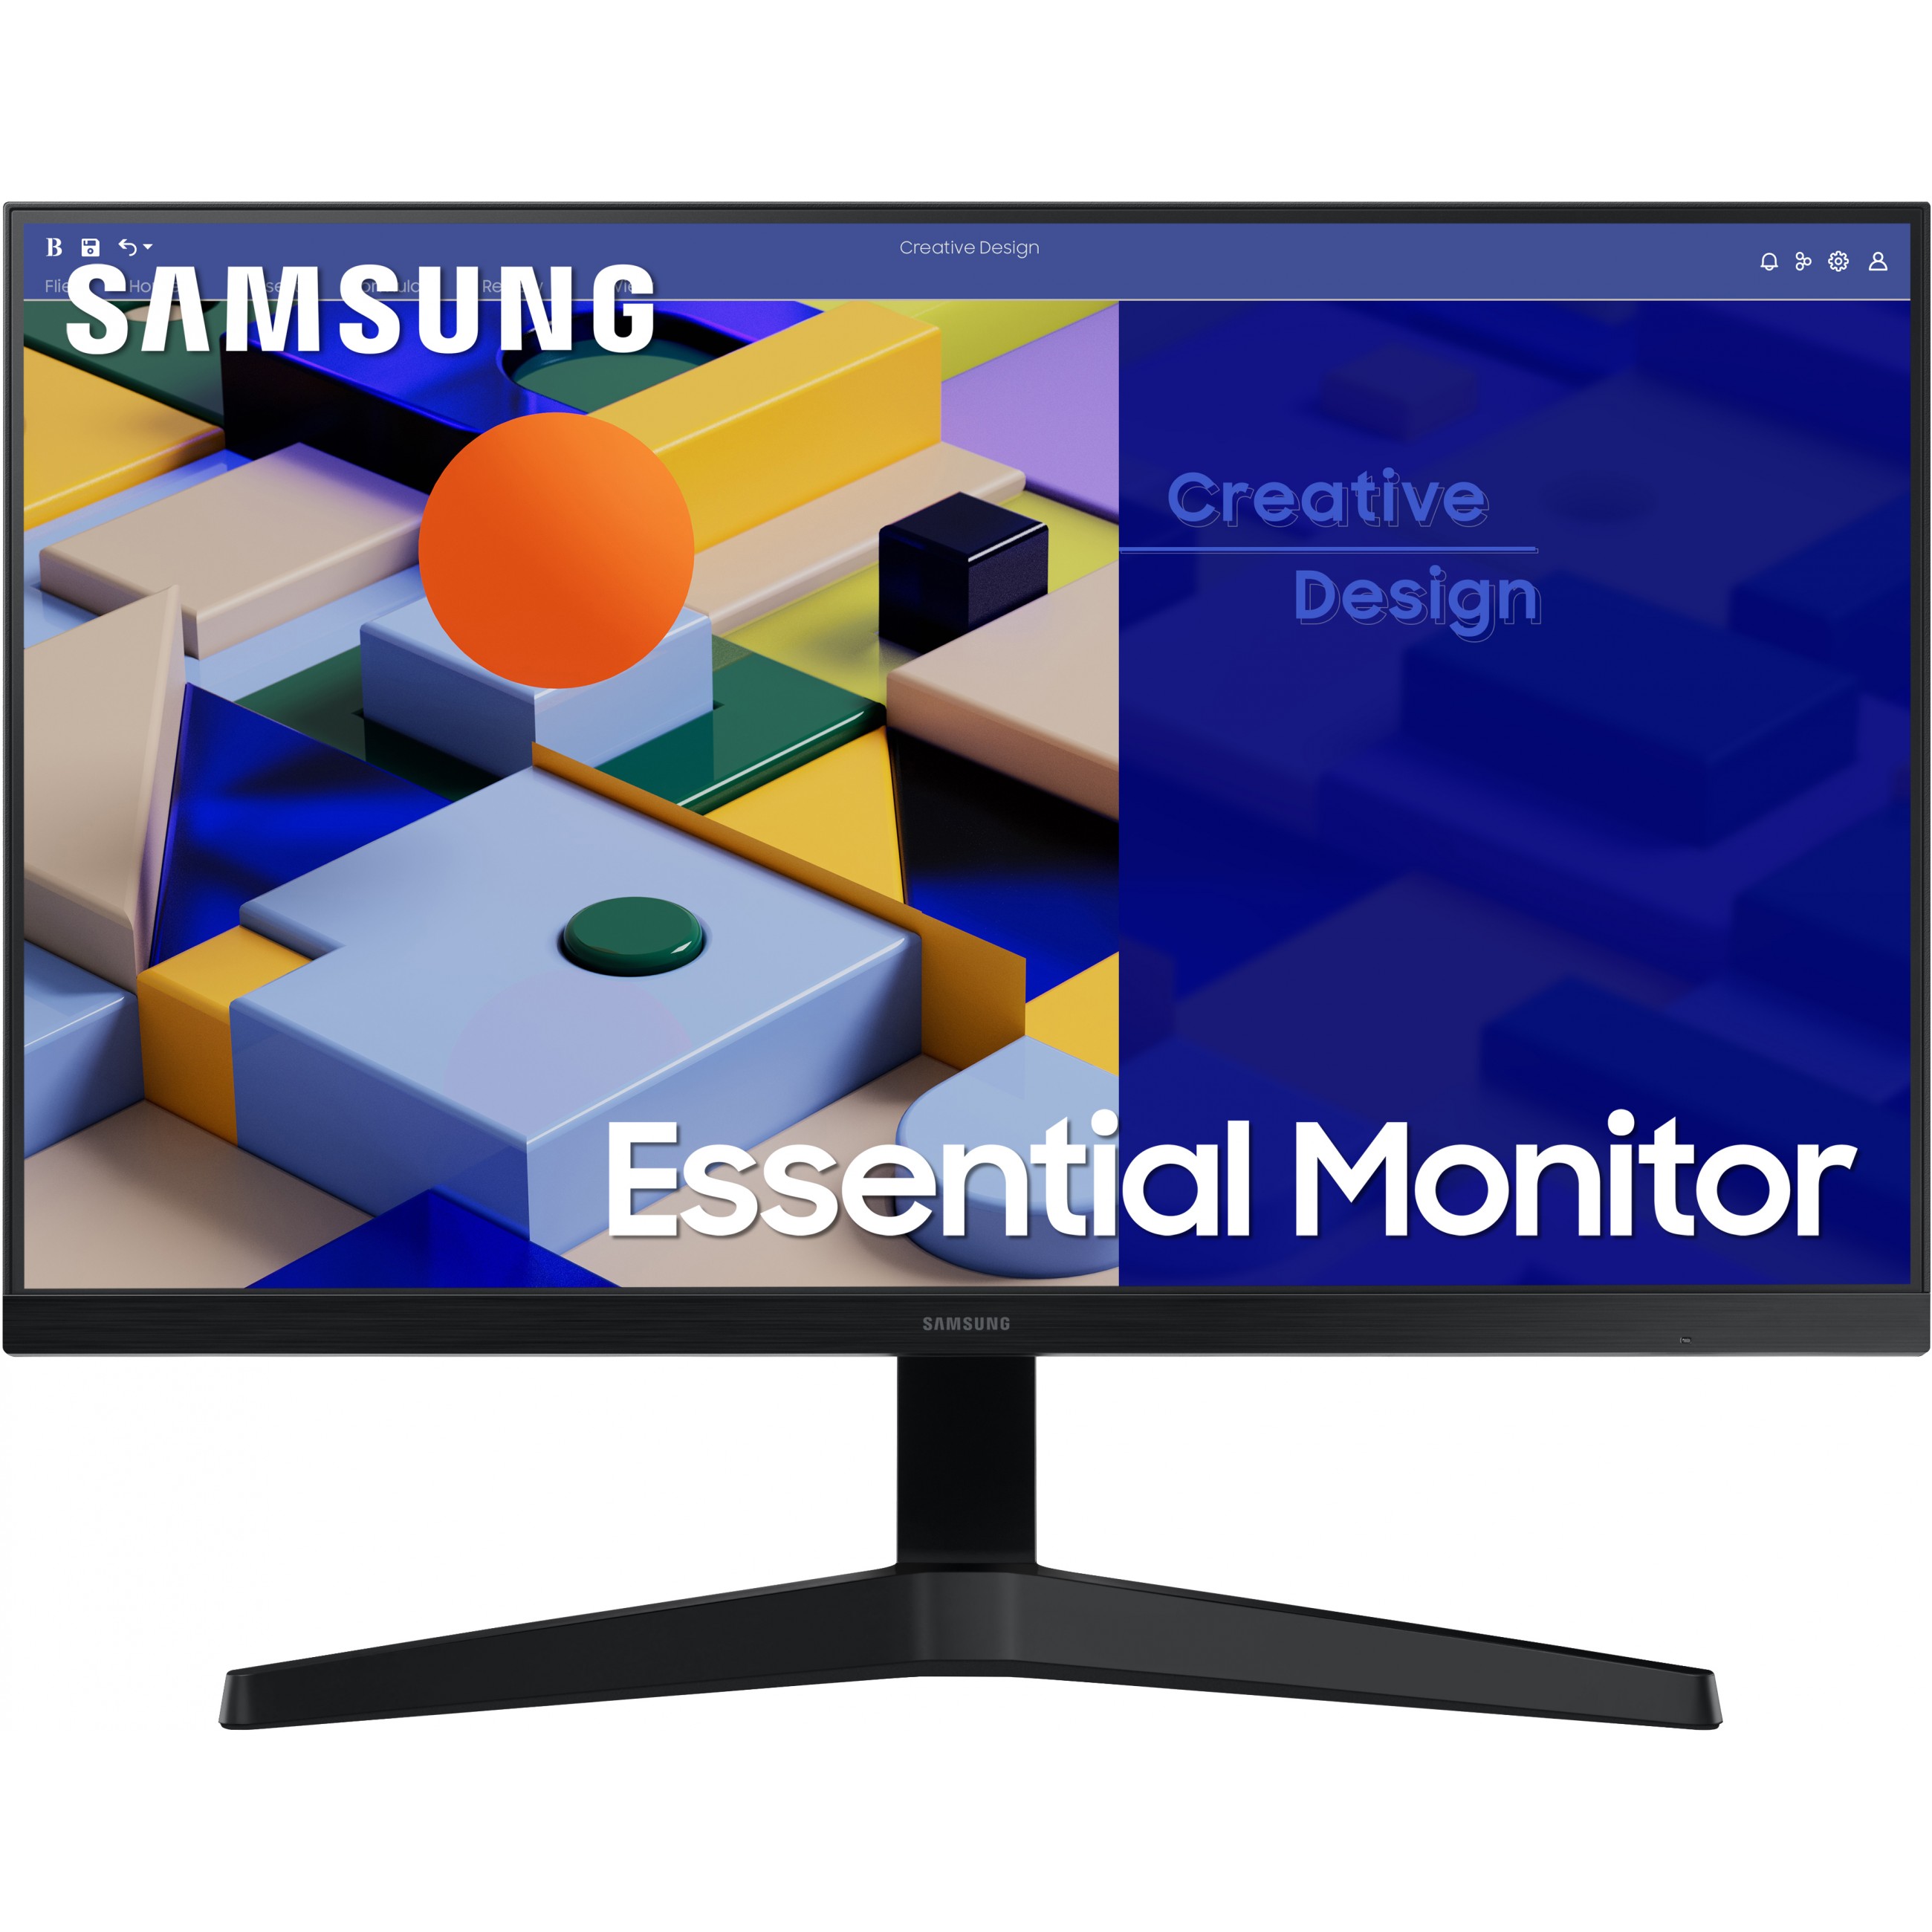 Samsung Essential Monitor S3 S31C LED display - LS27C310EAUXEN